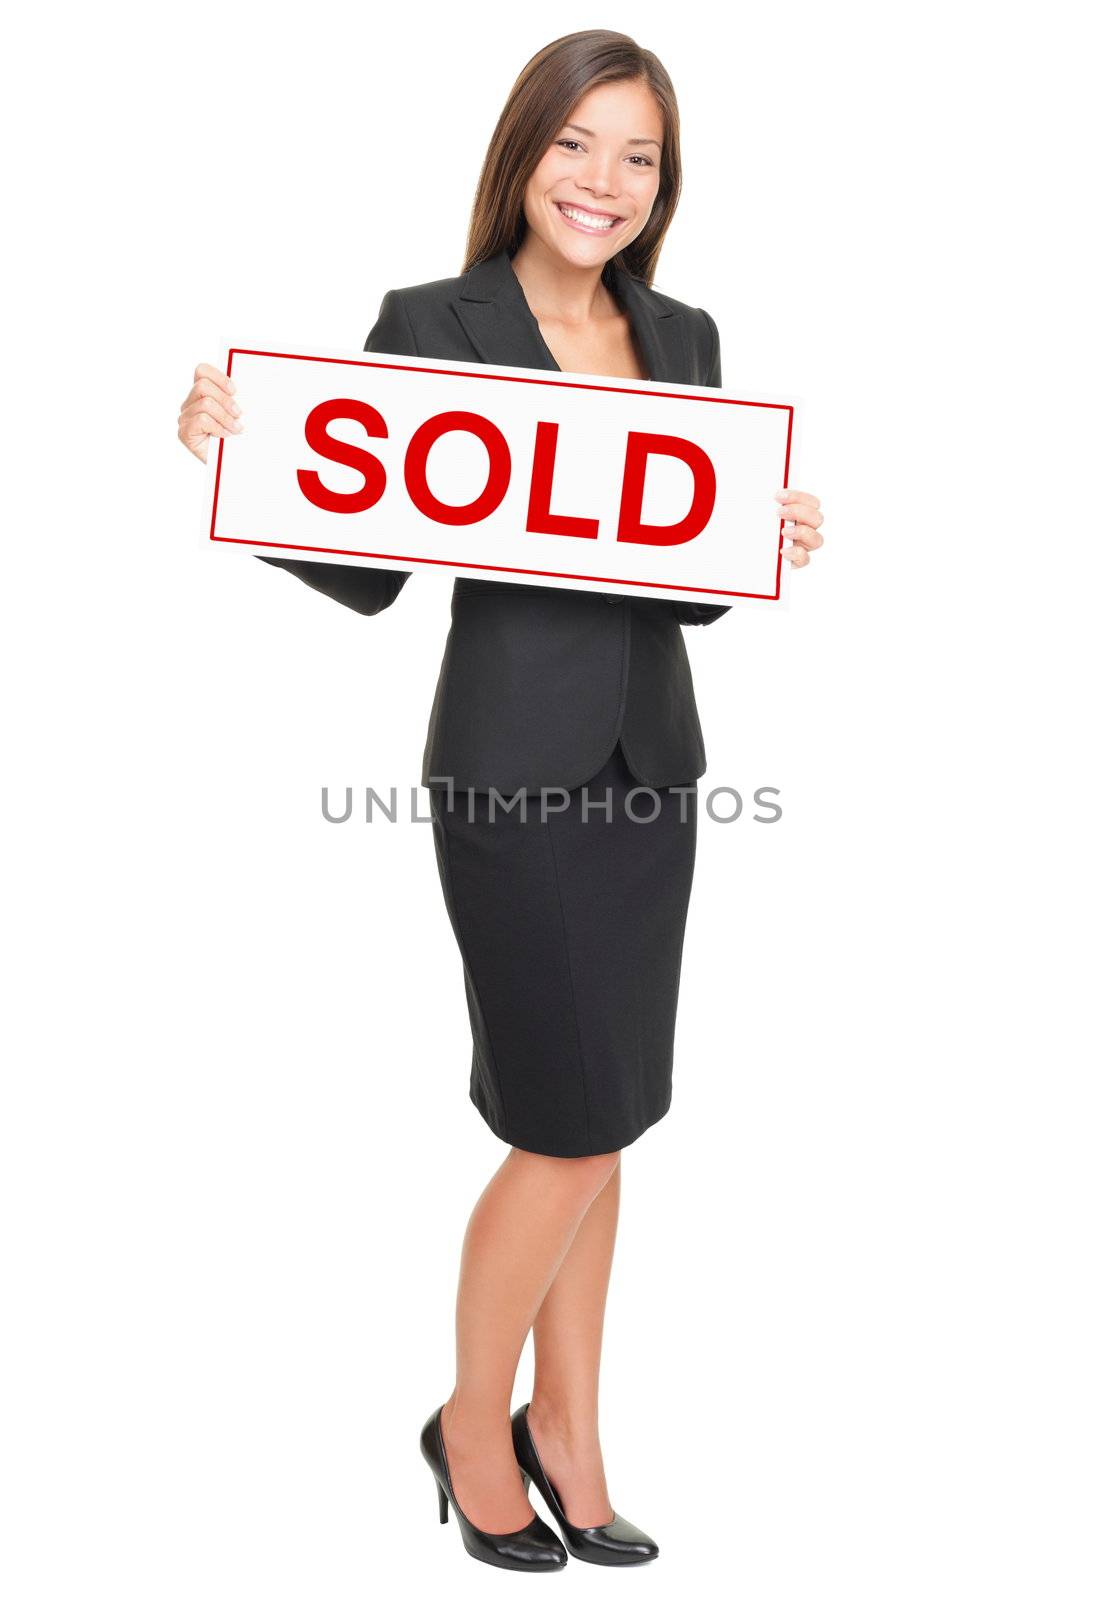 Real estate agent showing sold sign isolated on white background. Beautiful smiling Asian / Caucasian female realtor standing confident in full length.